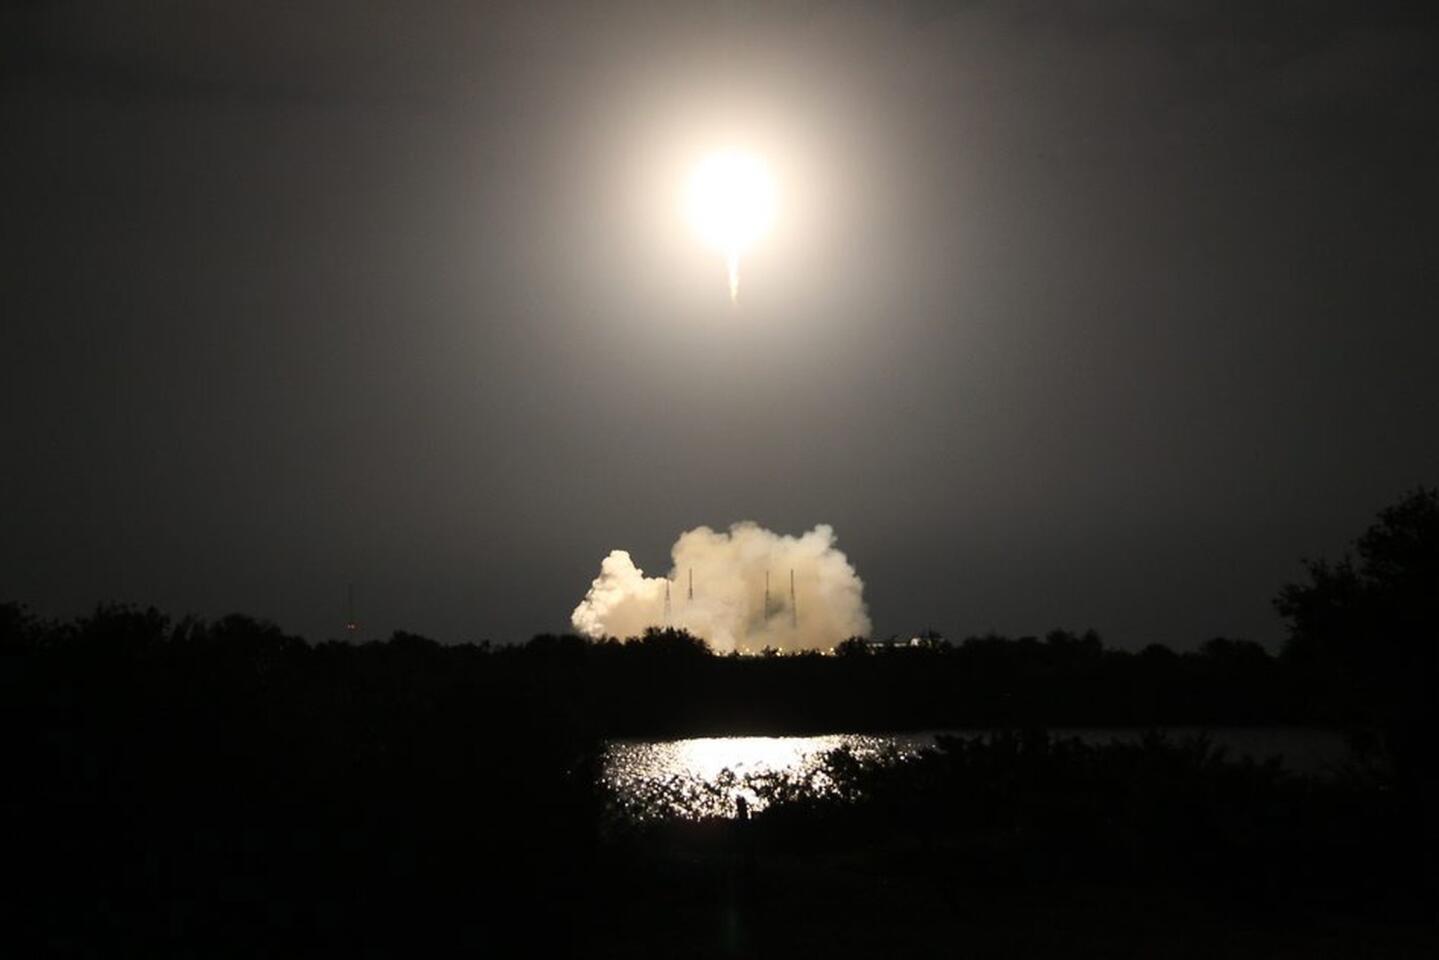 SpaceX's Falcon 9 rocket lifts off from Cape Canaveral carrying the Dragon resupply spacecraft to the International Space Station.